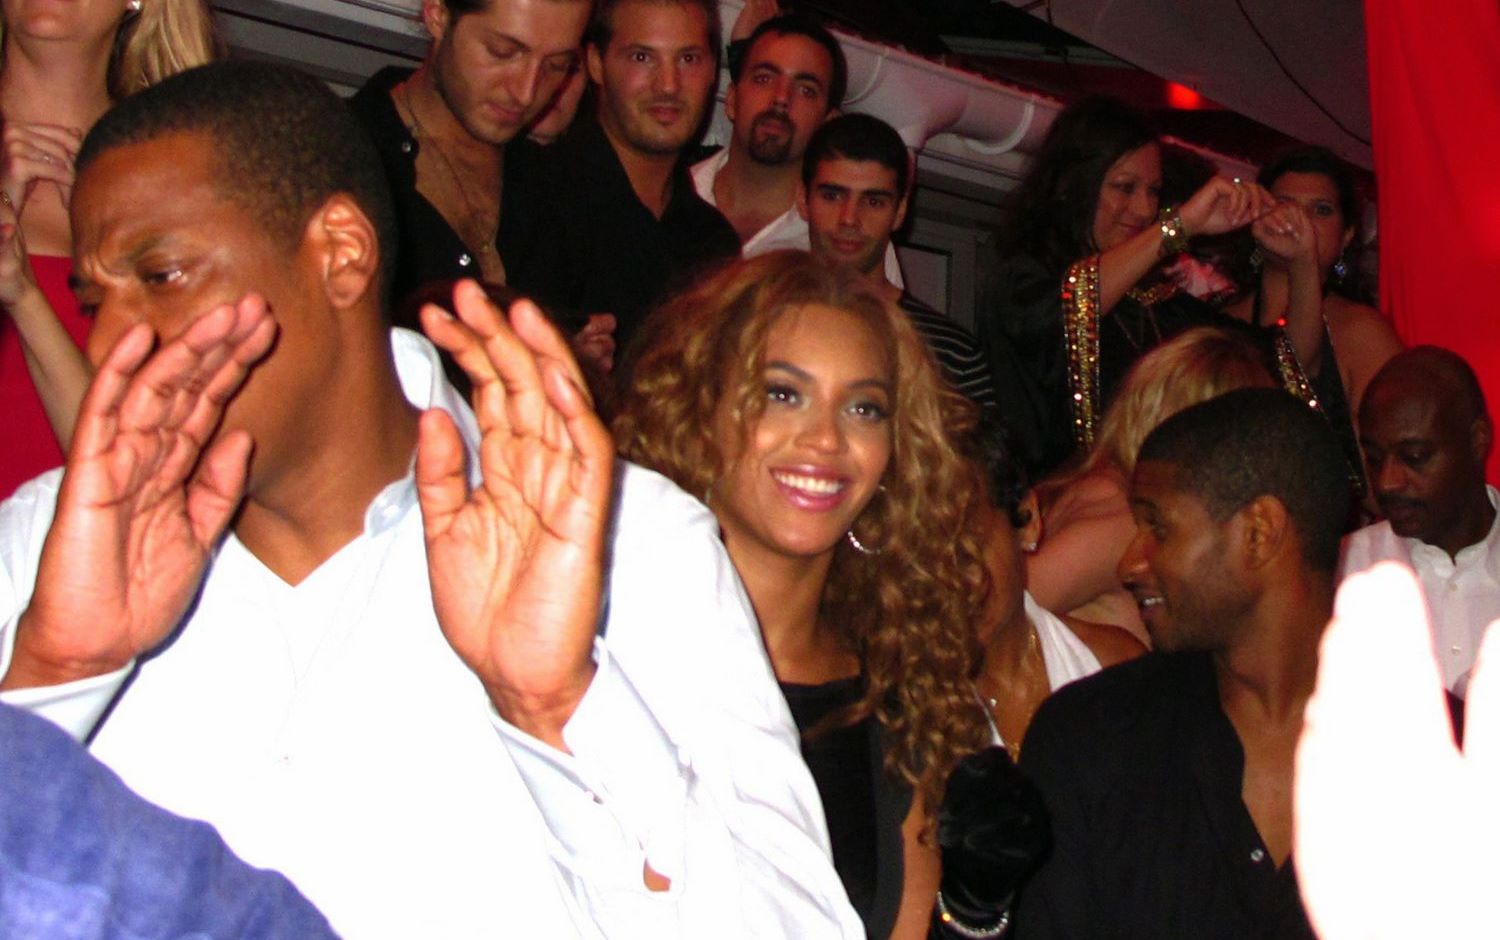 Pics: Beyonce, Jay-Z & Usher Celebrate The New Year Together | HipHop-N-More